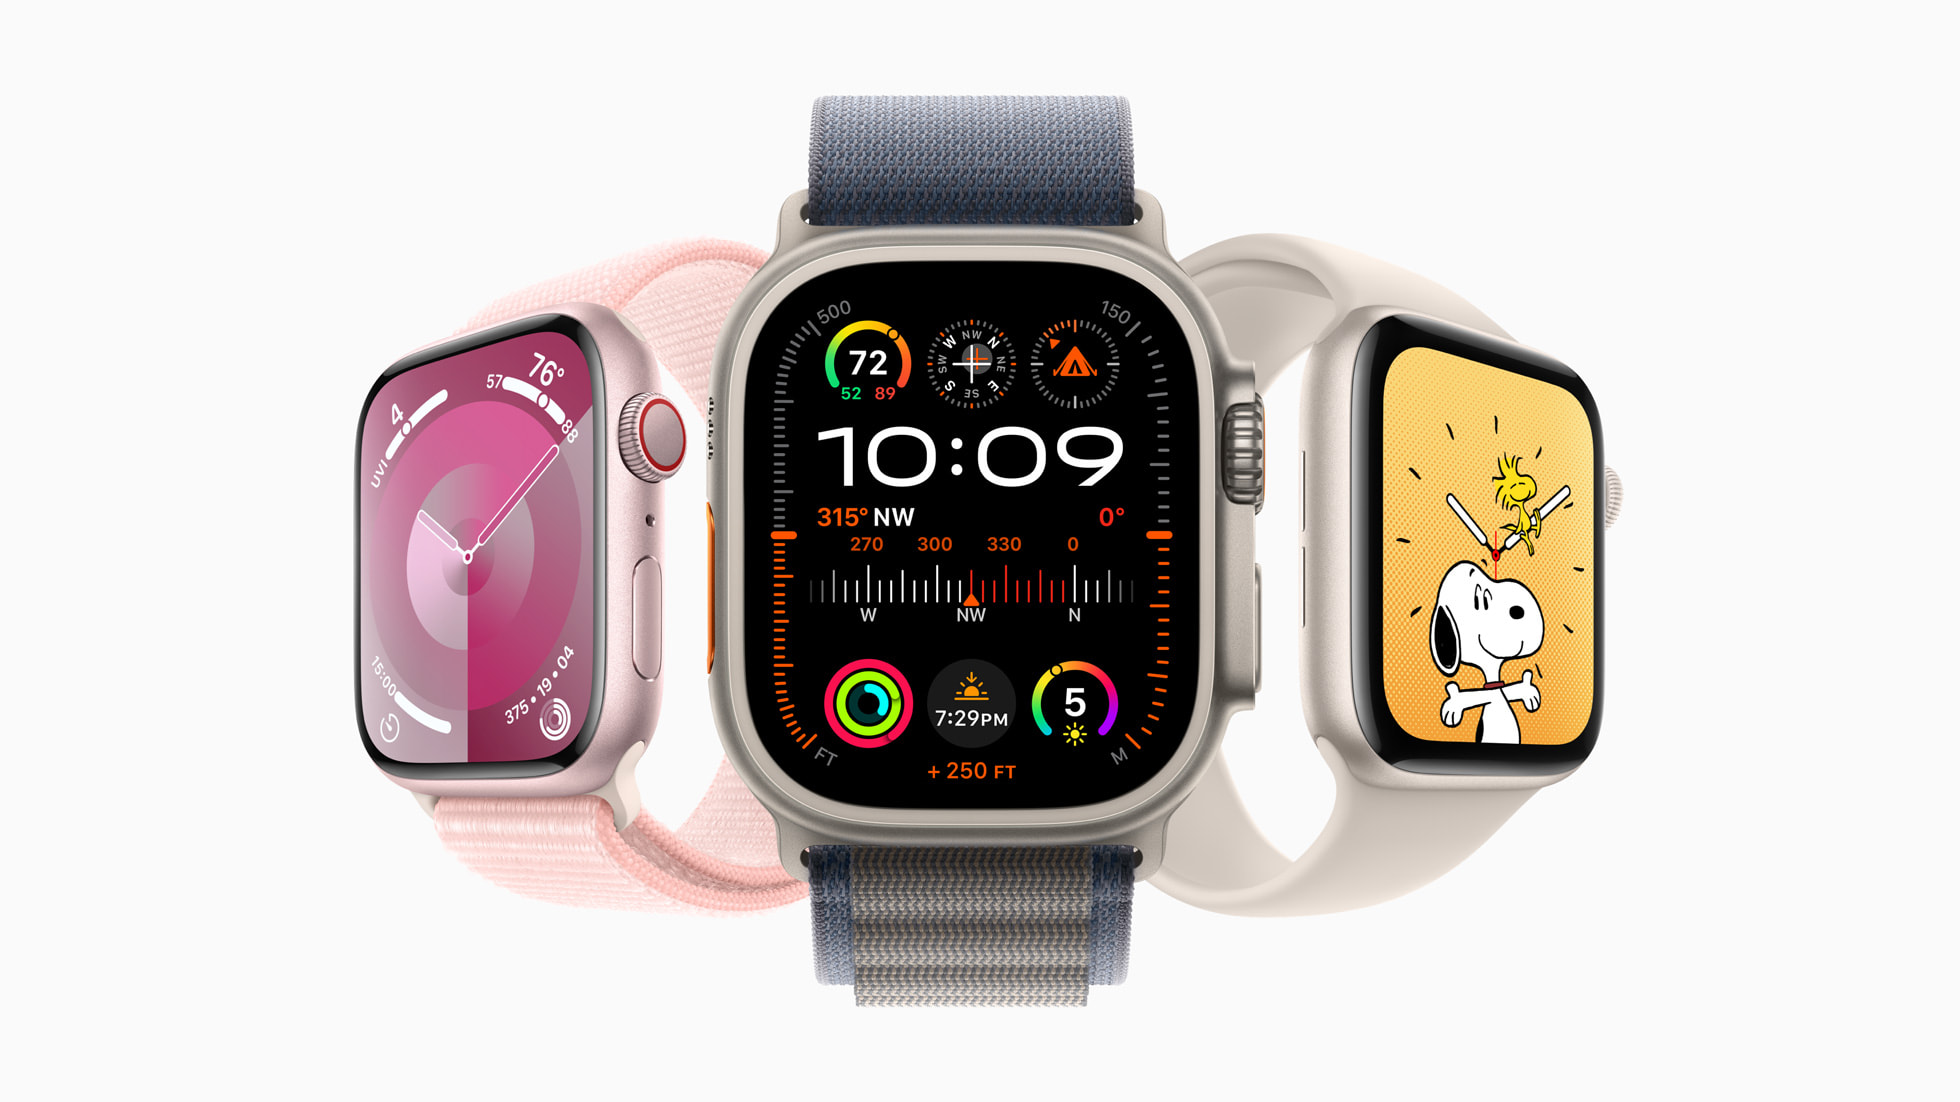 https://www.apple.com/newsroom/images/2023/09/watchos-10-is-available-today/article/Apple-watchOS-10-watch-family_big.jpg.large_2x.jpg